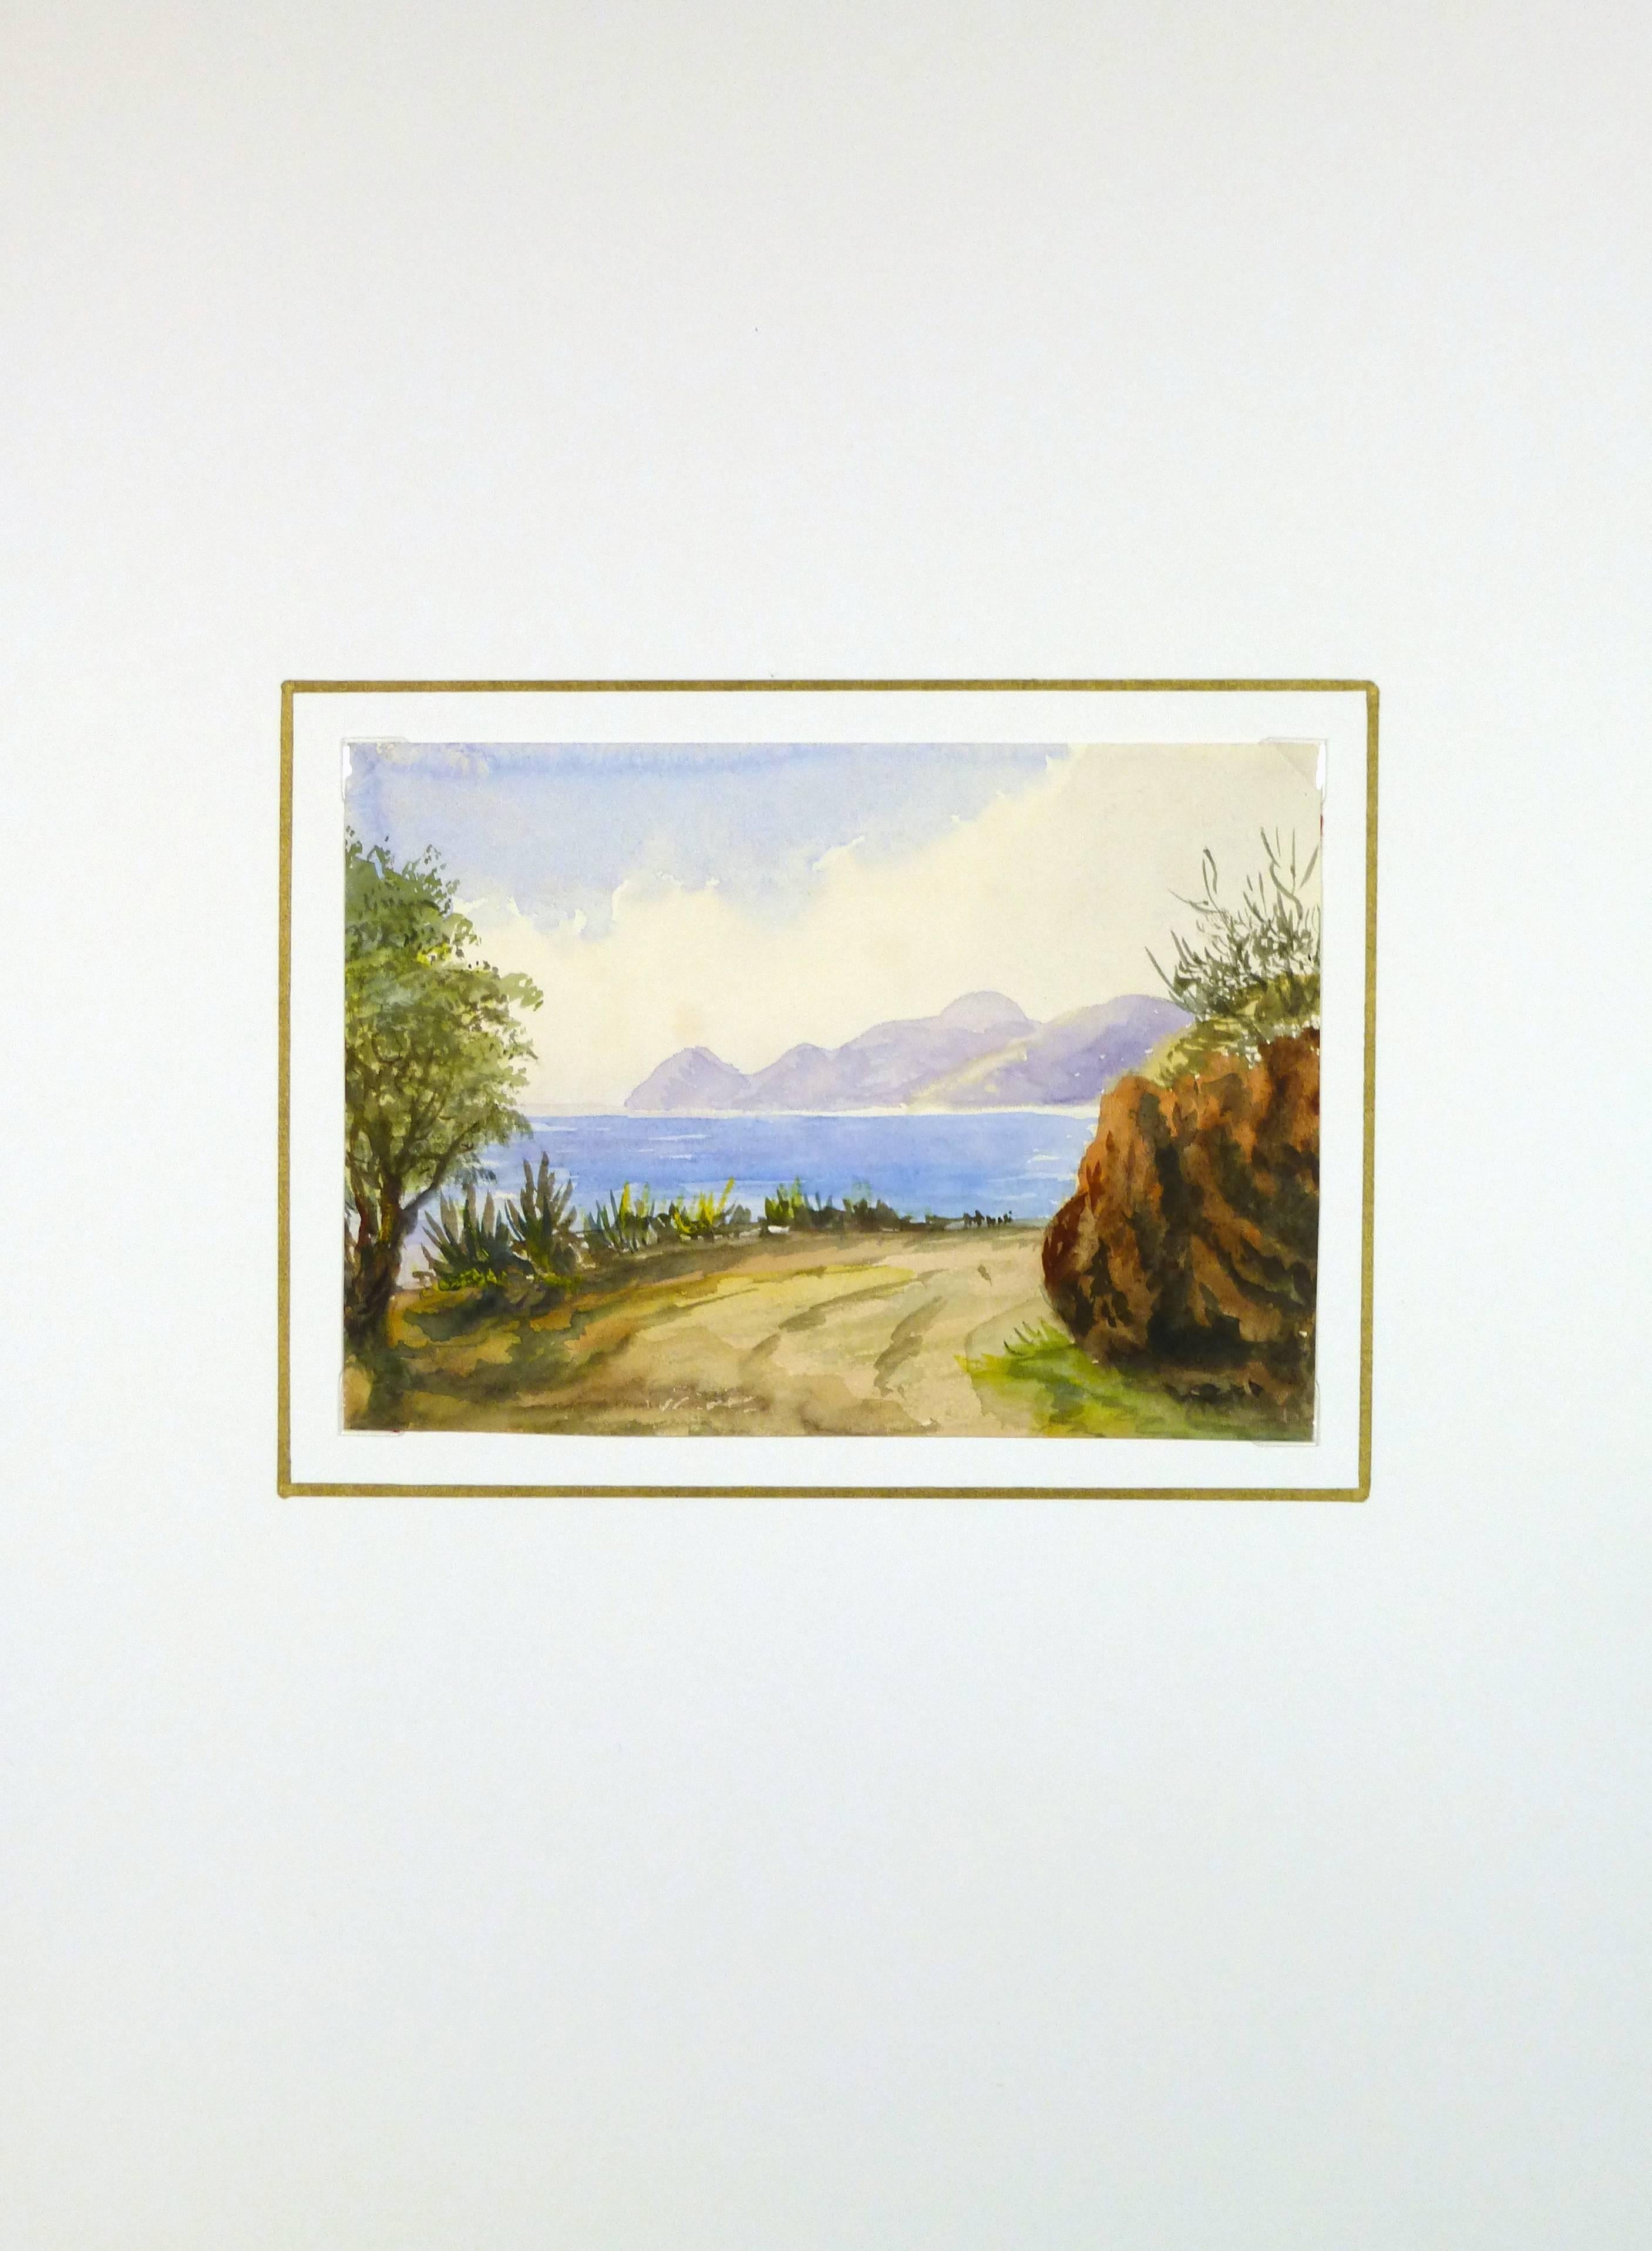 Pleasing watercolor path and water of the coast of Estérel near Cannes France, by artist JR Dringham, circa 1950.  

Original artwork on paper displayed on a white mat with a gold border. Archival plastic sleeve and Certificate of Authenticity